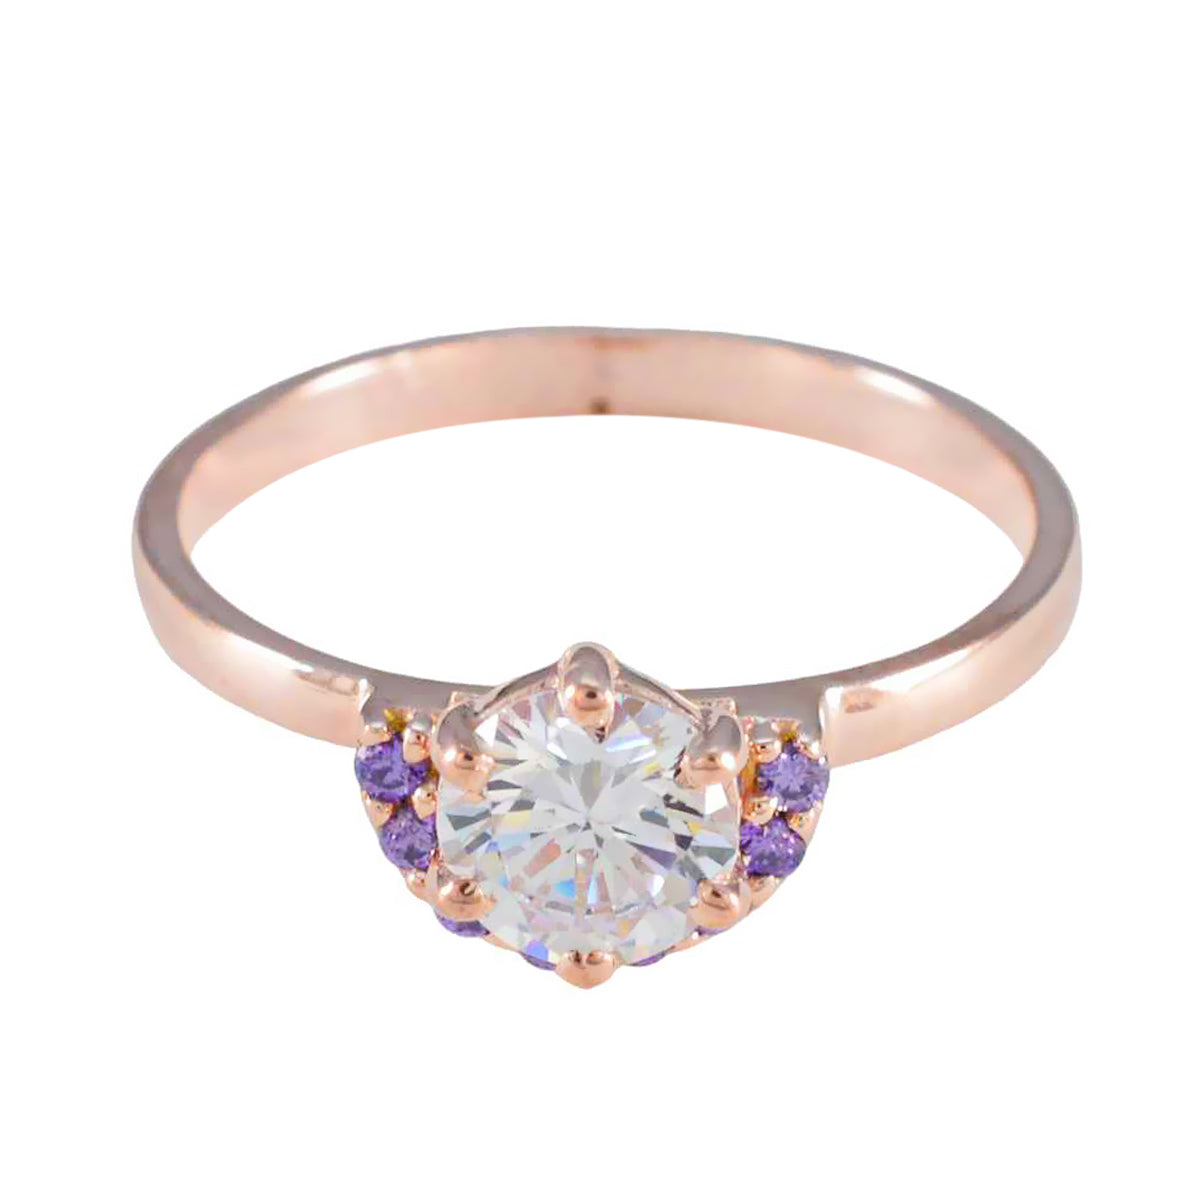 Riyo Jaipur Silver Ring With Rose Gold Plating Amethyst Stone Round Shape Prong Setting Antique Jewelry Graduation Ring